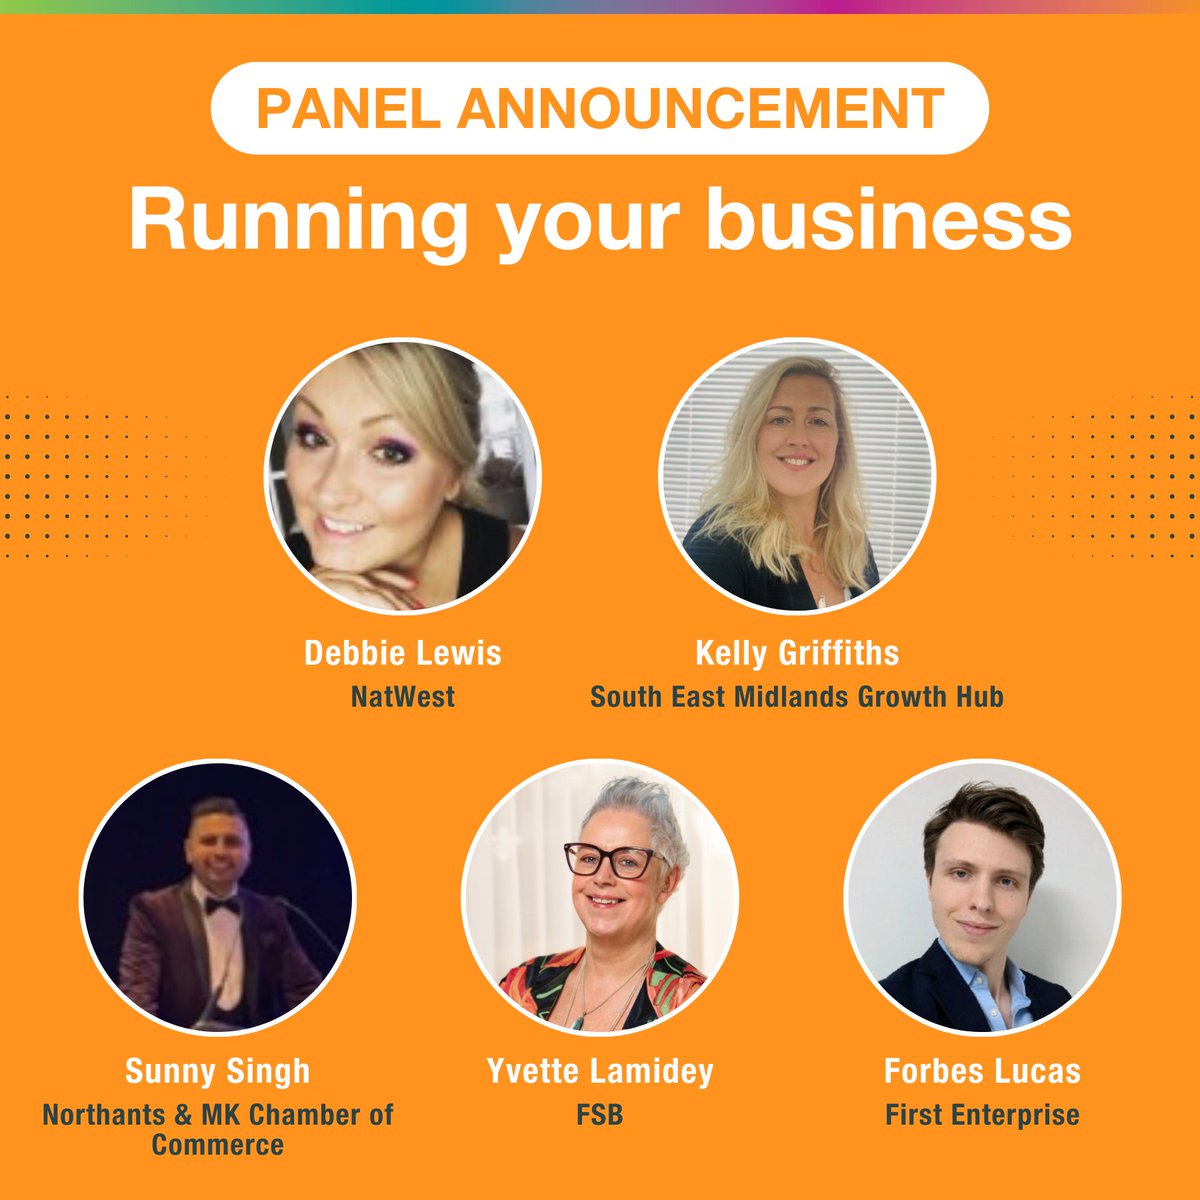 Have you booked your place for BusinessFest yet? Check out the impressive line up of speakers announced so far for 'Panel 1: Starting your business' and 'Panel 2: Running your business' 🙌 Stay tuned as we reveal the rest of the expert speakers over the next few days...